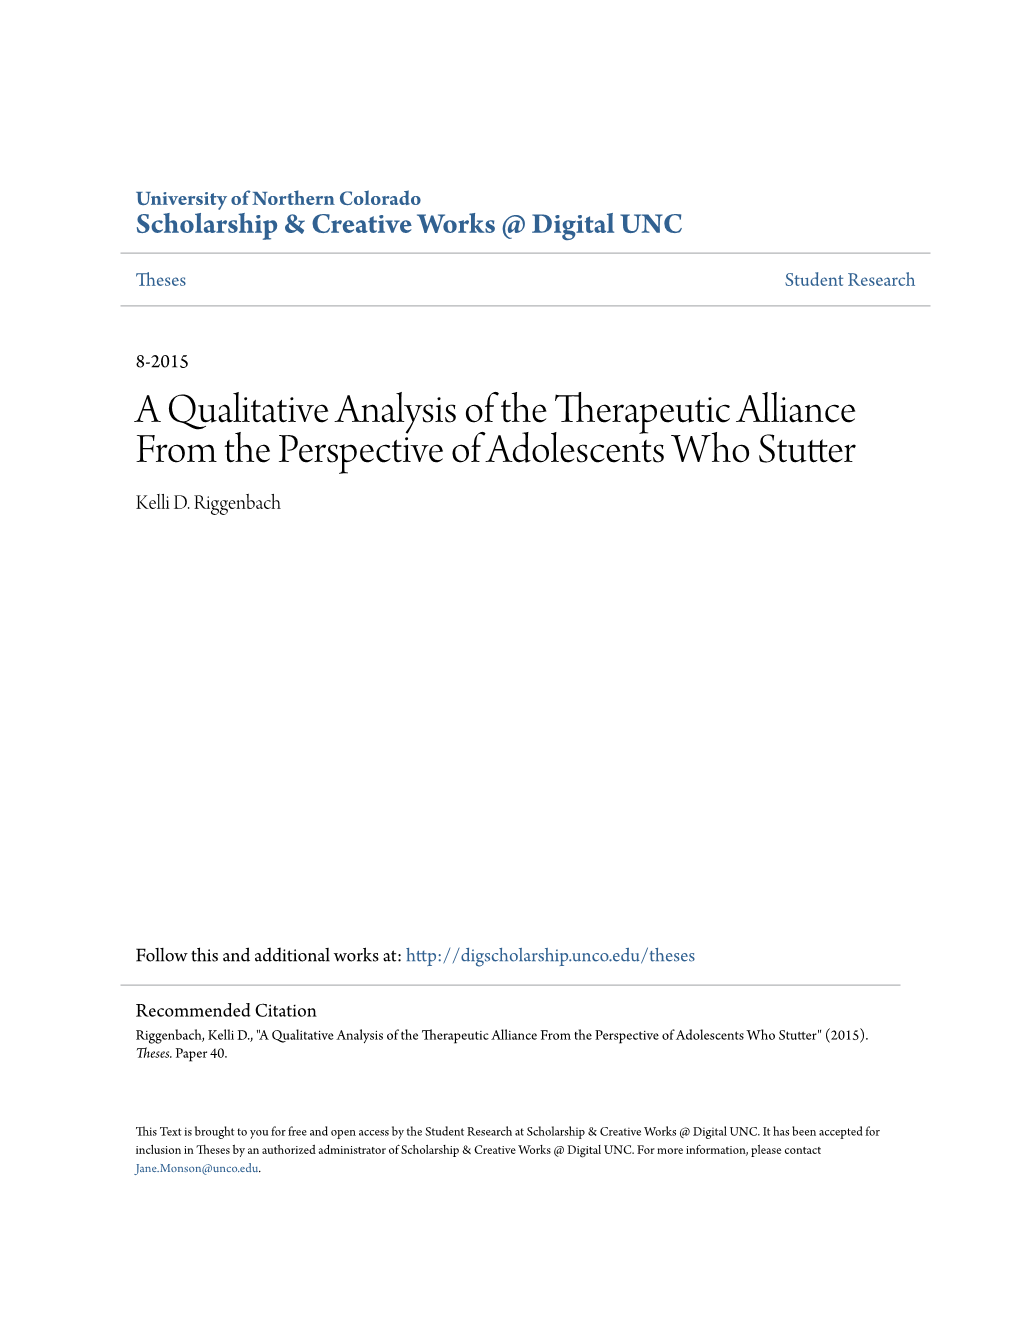 A Qualitative Analysis of the Therapeutic Alliance from the Perspective of Adolescents Who Stutter Kelli D